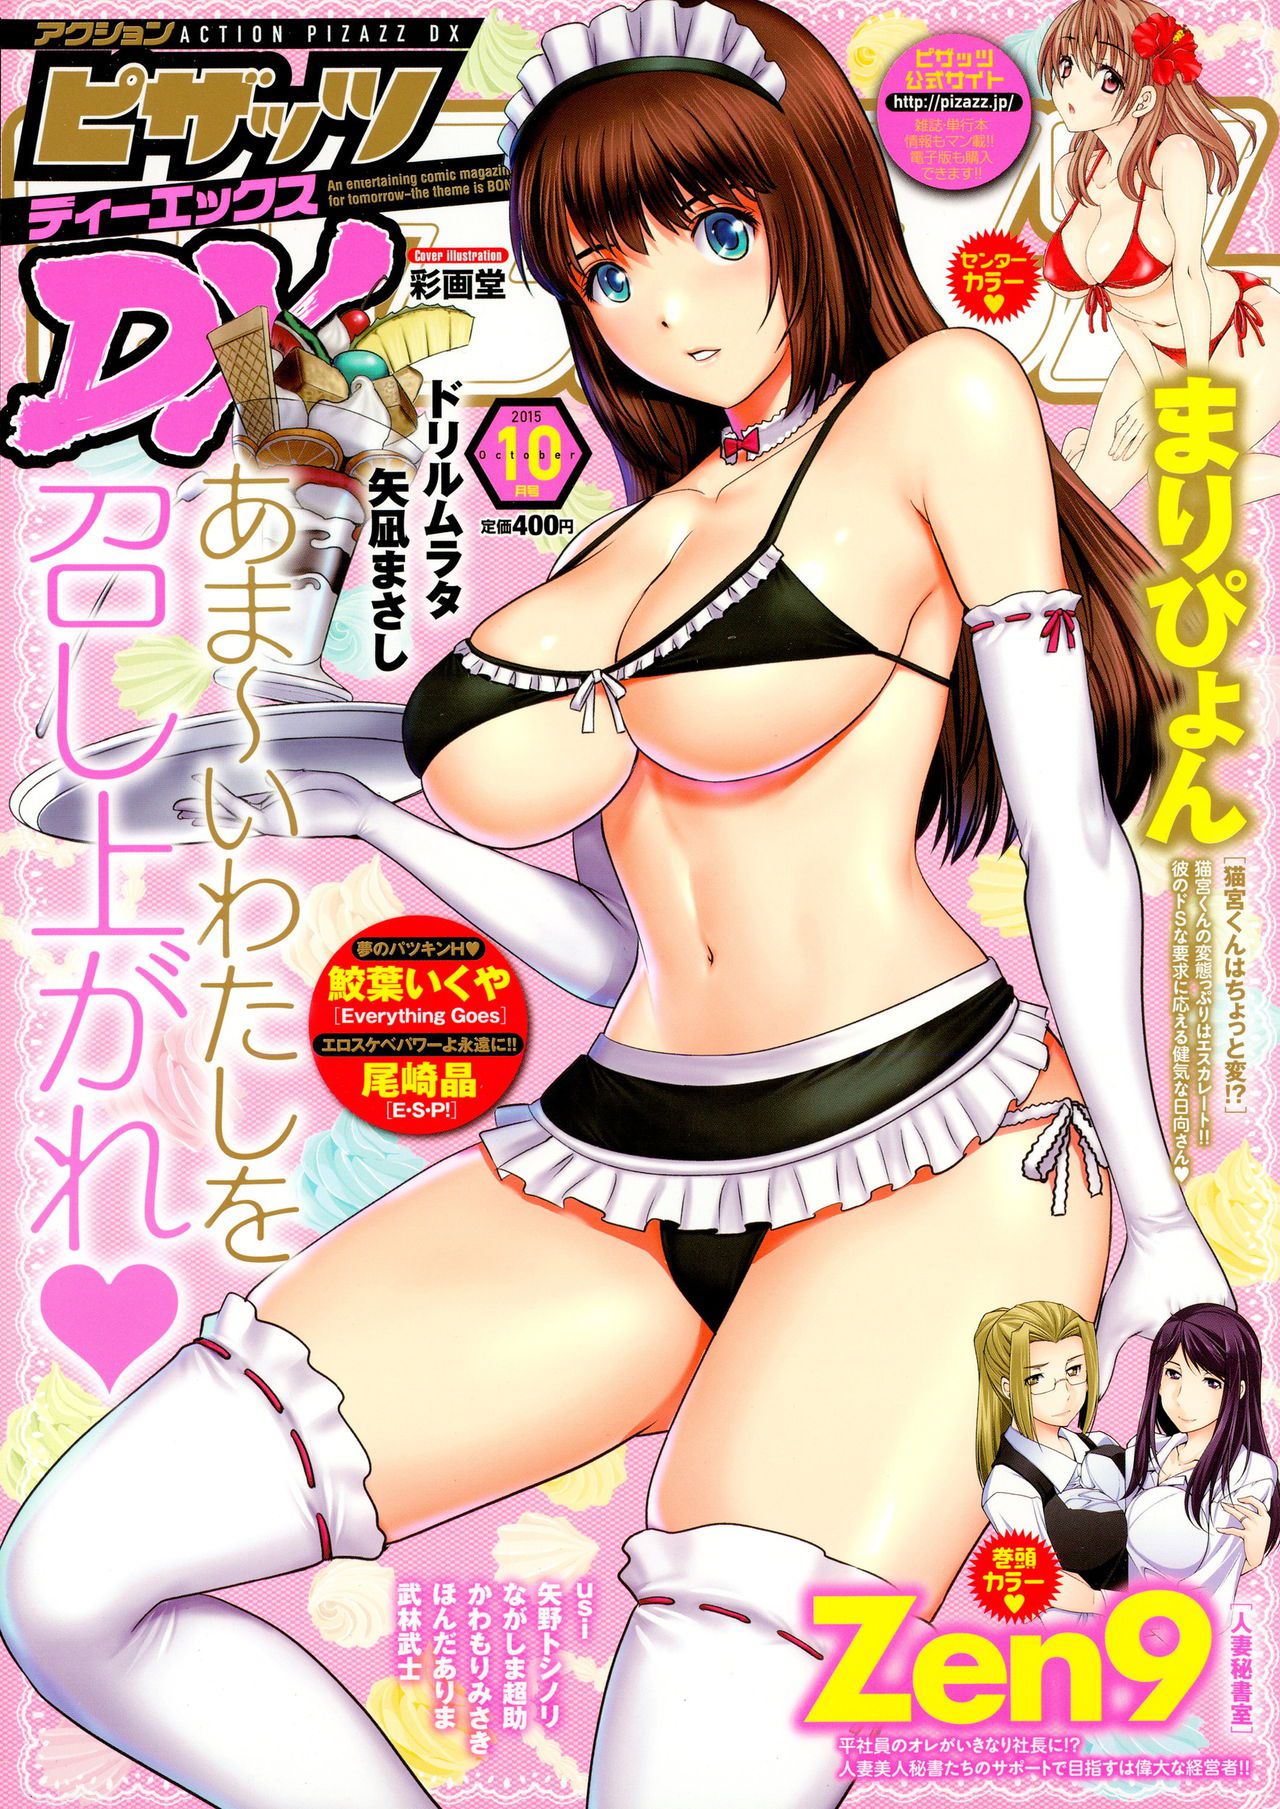 [Saigado] Cover Illustrations [彩画堂] Cover Illustrations 208